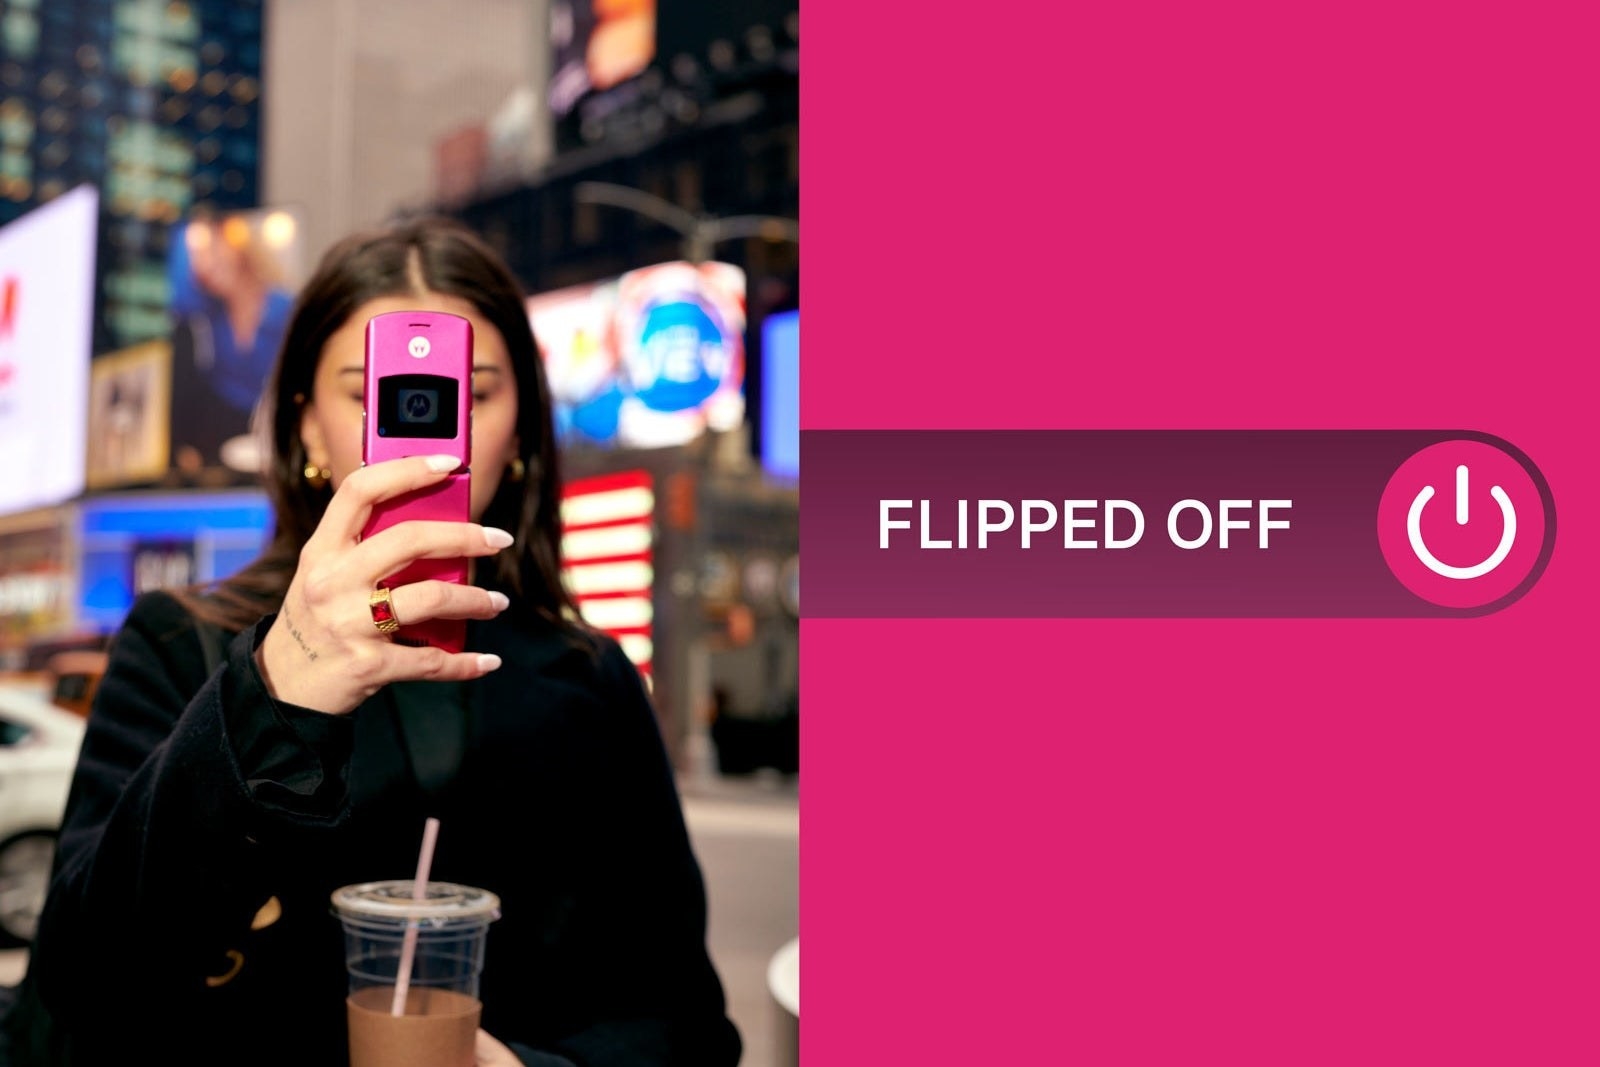 left: a dark-haired woman holds up a pink razr phone covering her face. right: a pink background with &quot;flipped off&quot; and a power button written in the middle